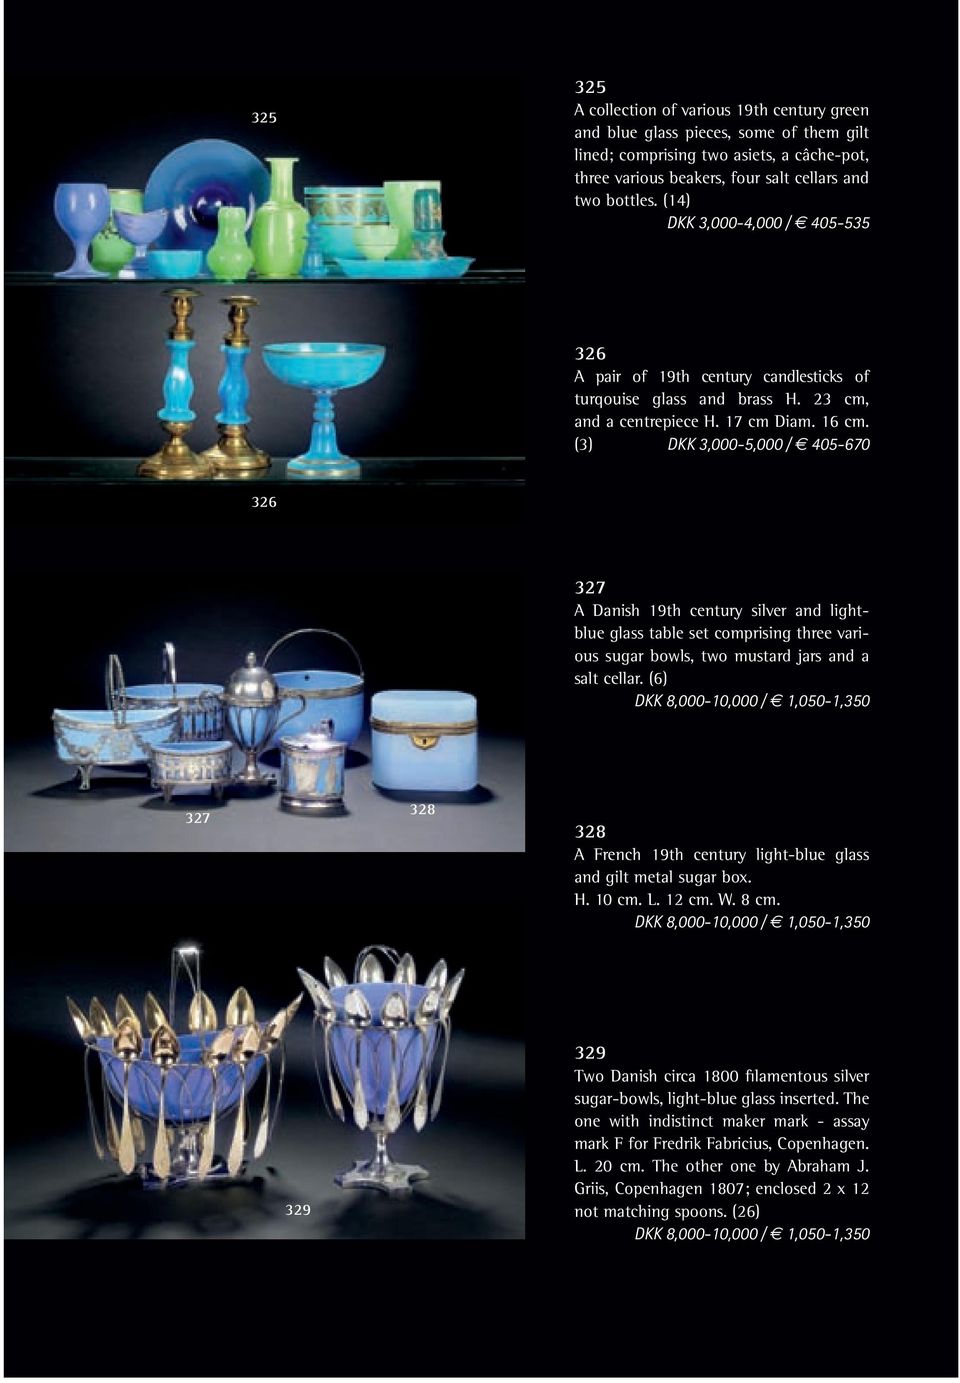 (3) DKK 3,000-5,000 / 405-670 326 327 A Danish 19th century silver and lightblue glass table set comprising three various sugar bowls, two mustard jars and a salt cellar.